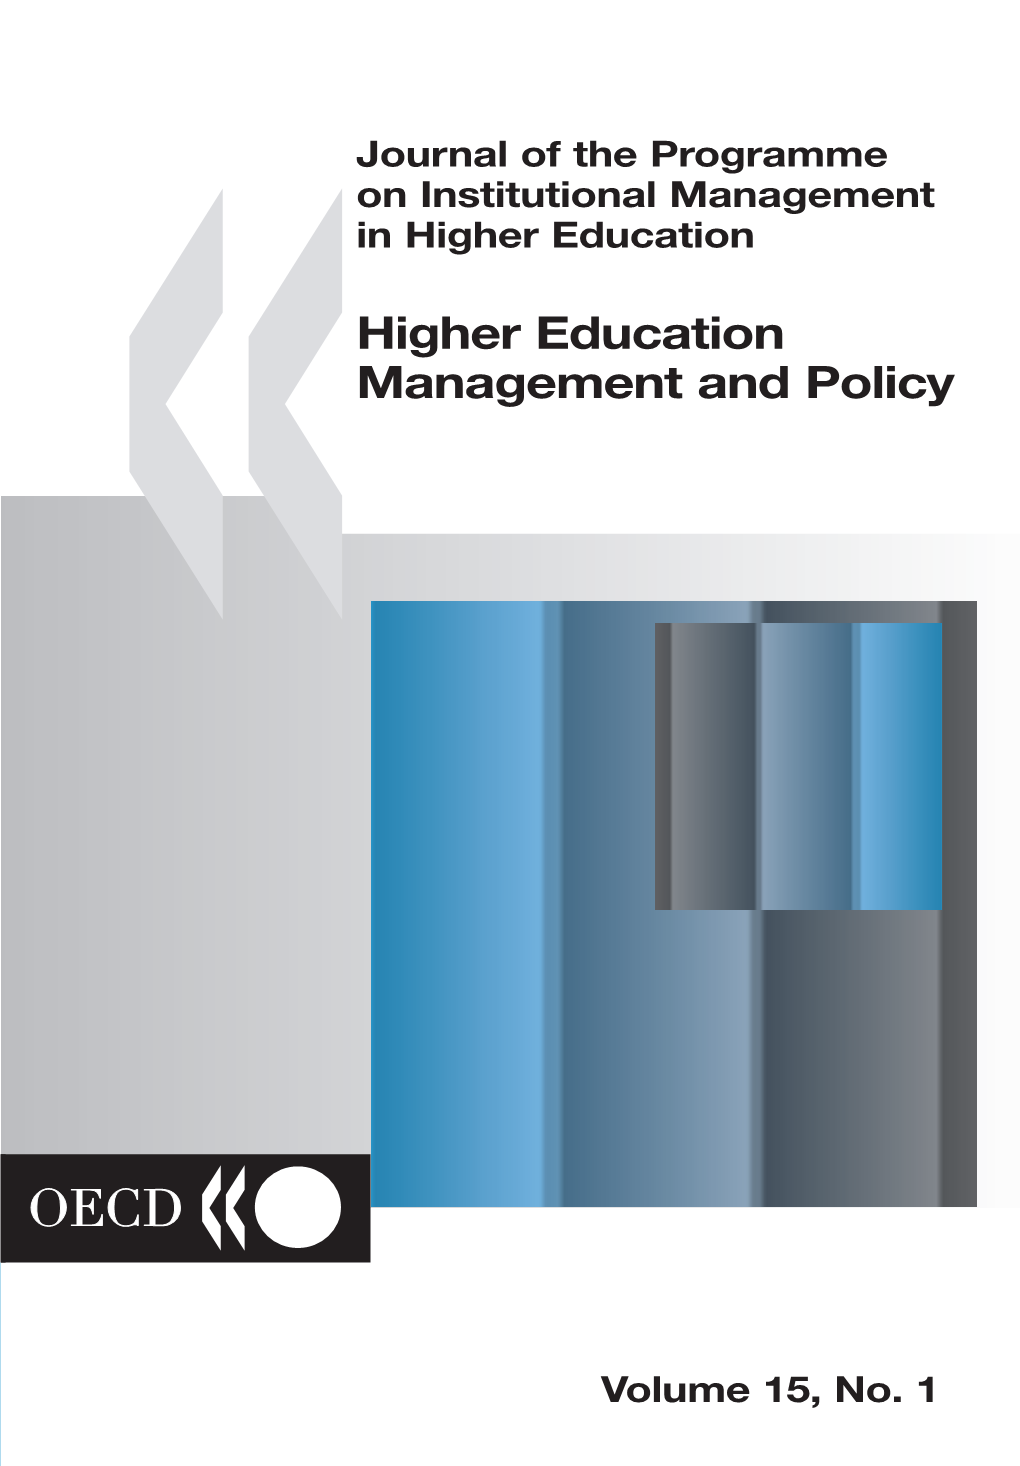 Highereducationmanagementand Policy